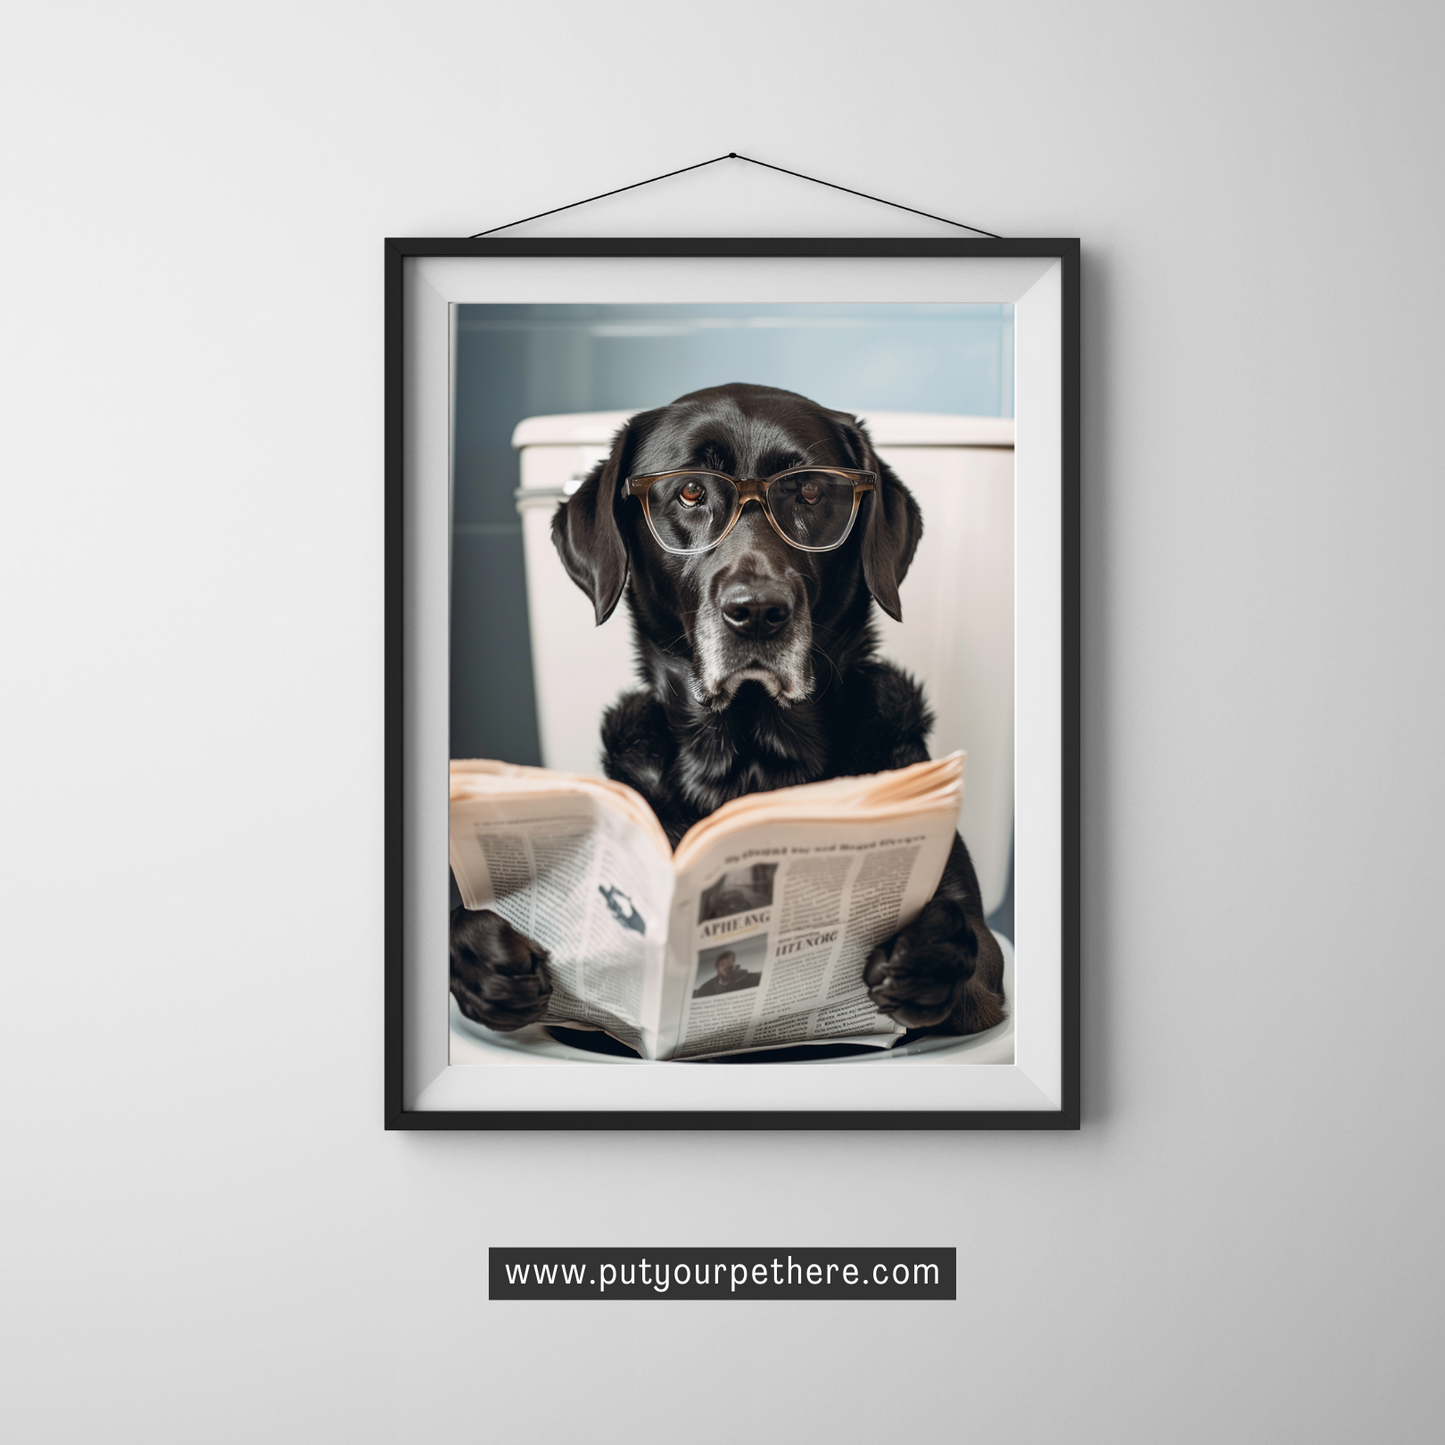 Digital artwork of an intellectual black Labrador wearing round glasses, sitting on toilet, attentively reading a newspaper, showcasing a blend of human-like intelligence and canine charm, available at putyourpethere.com.